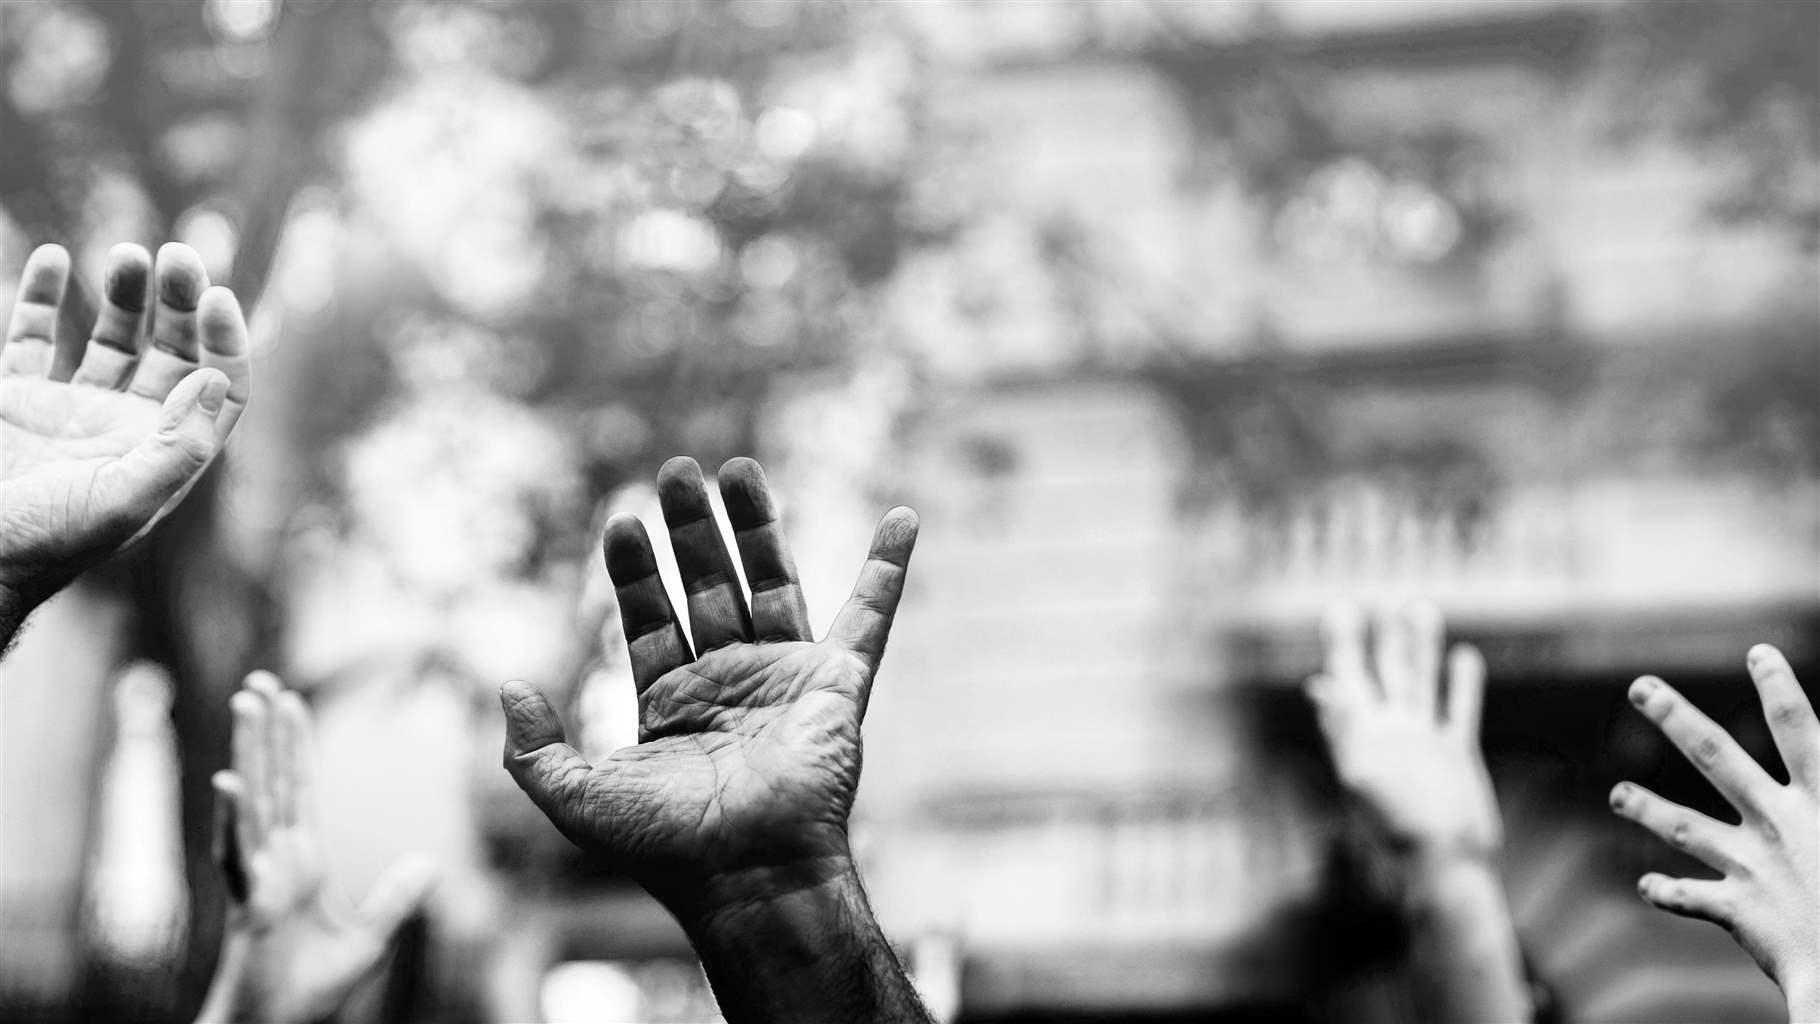 Black and white photo of hands of diverse skin colors raised in the air.